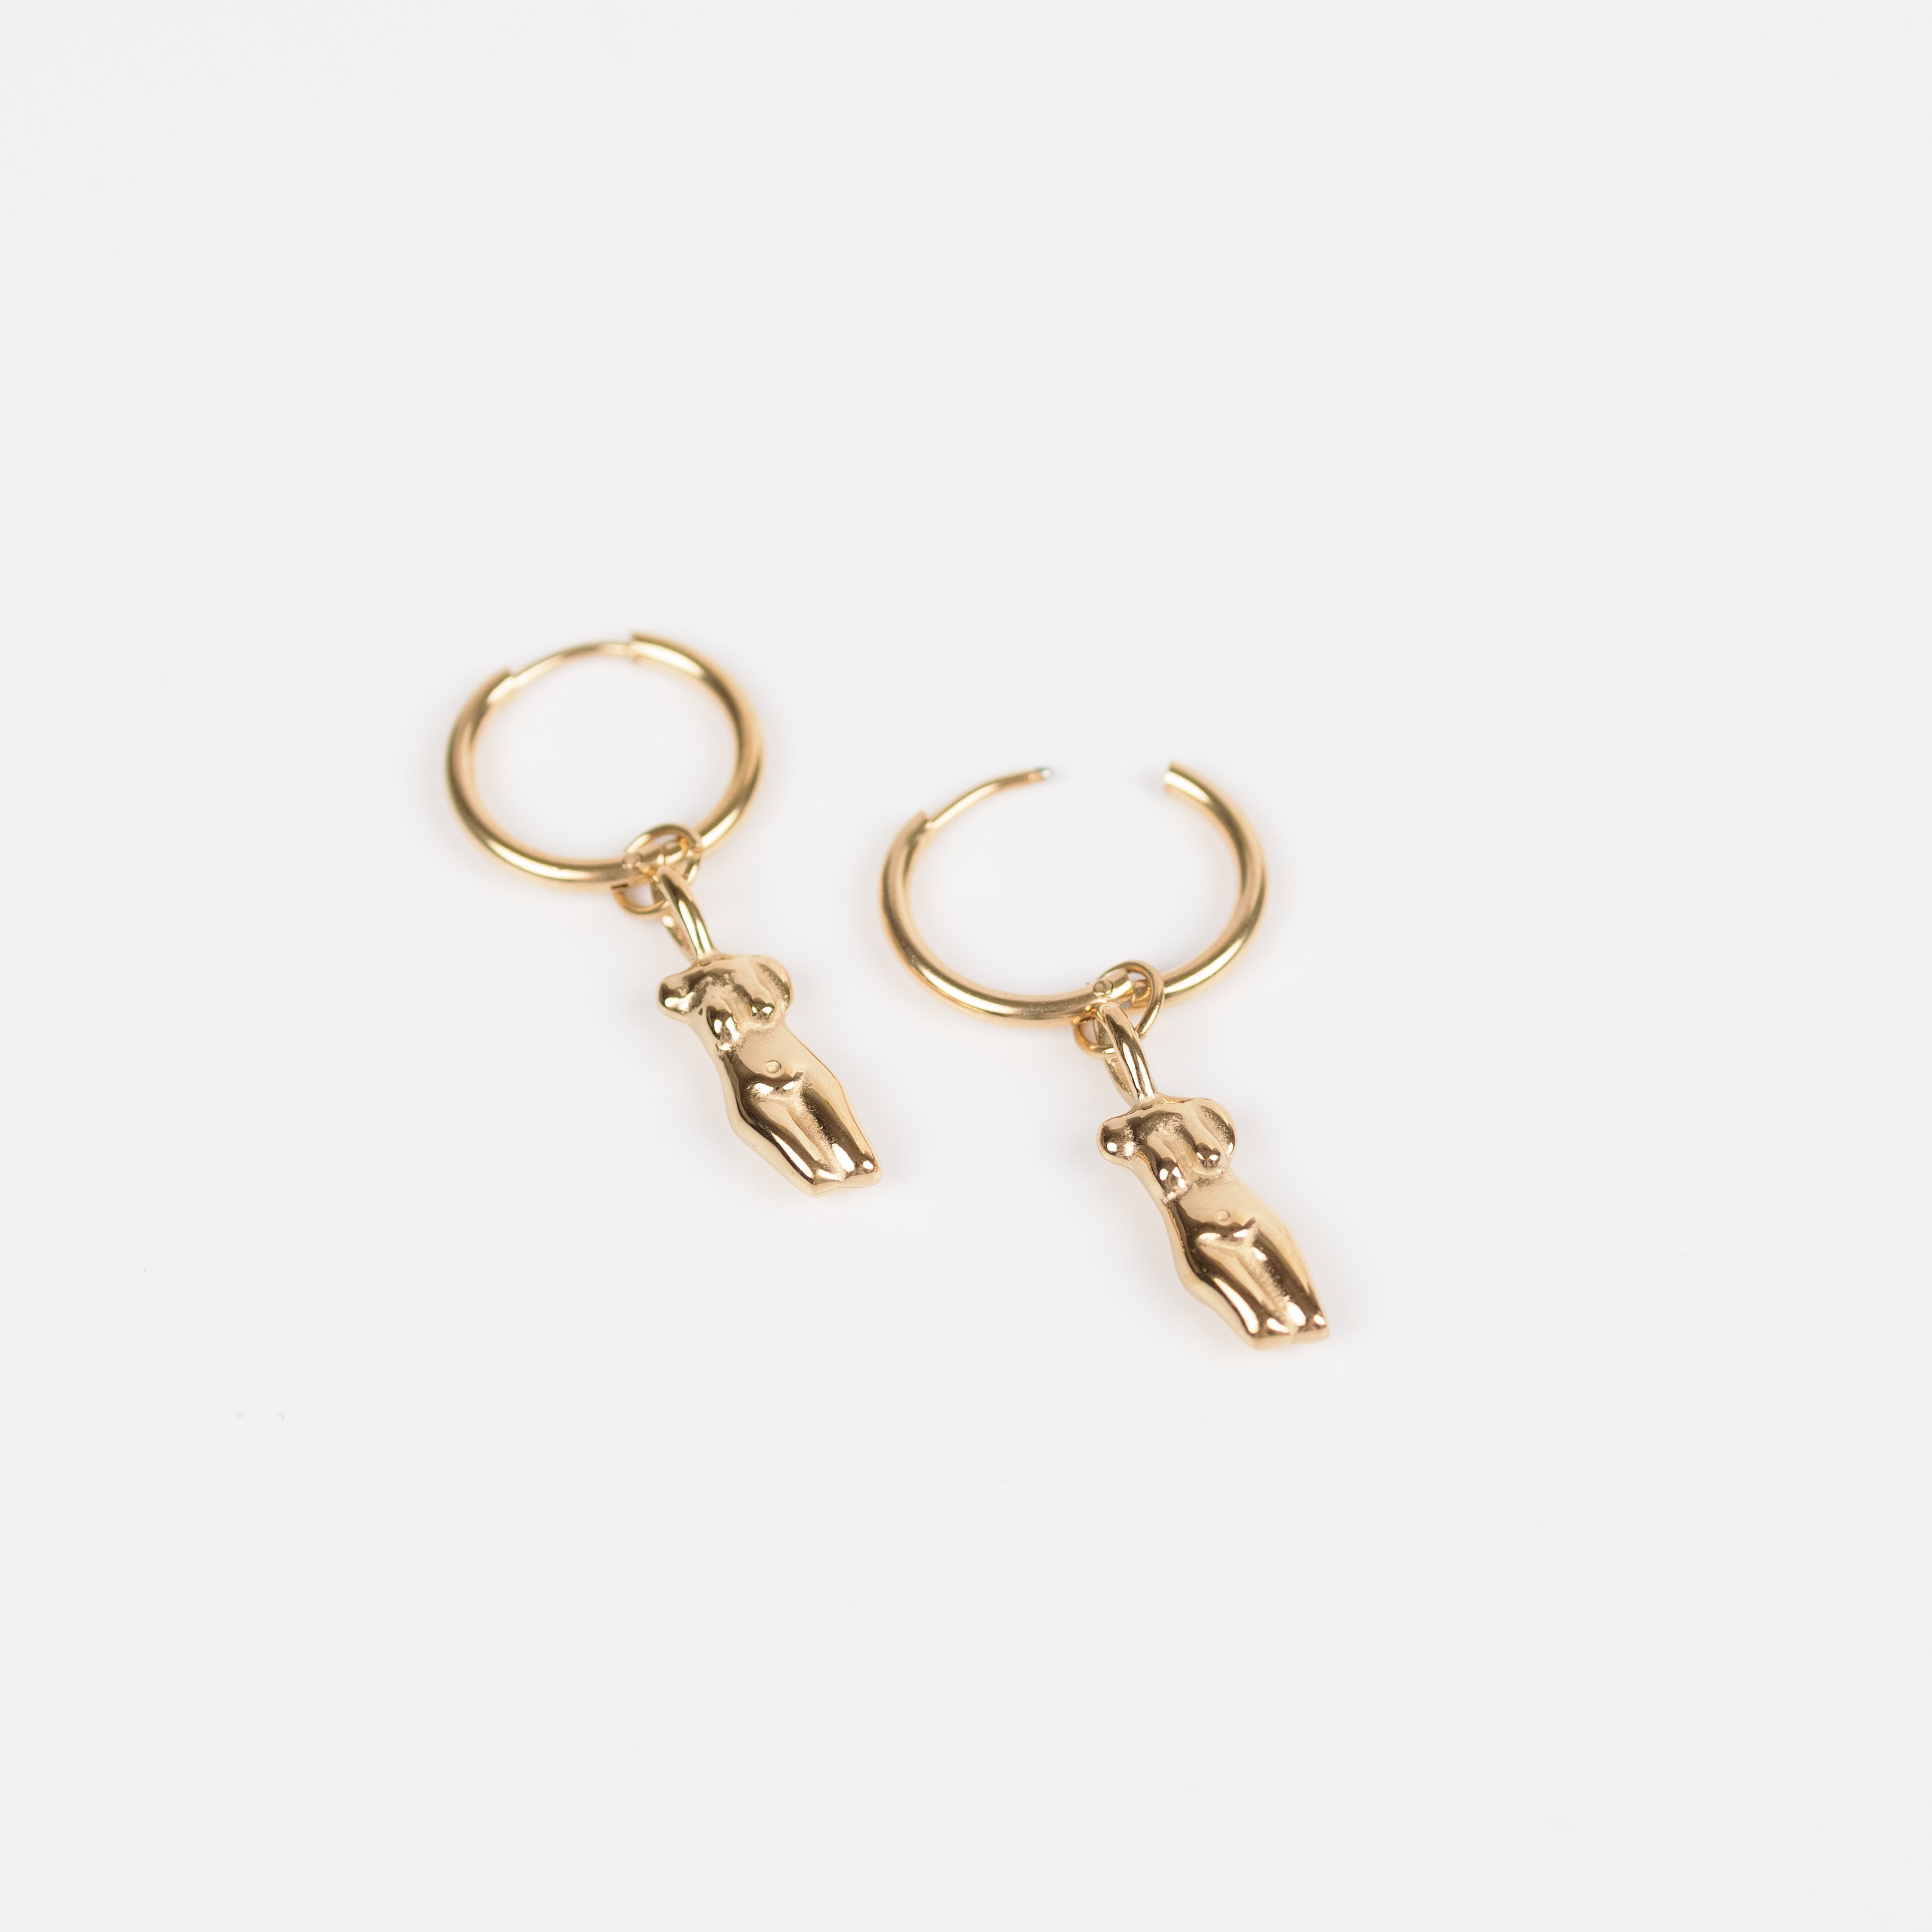 Female Body Abstract Earrings - Stainless Steel 18K gold plated - Zafeer